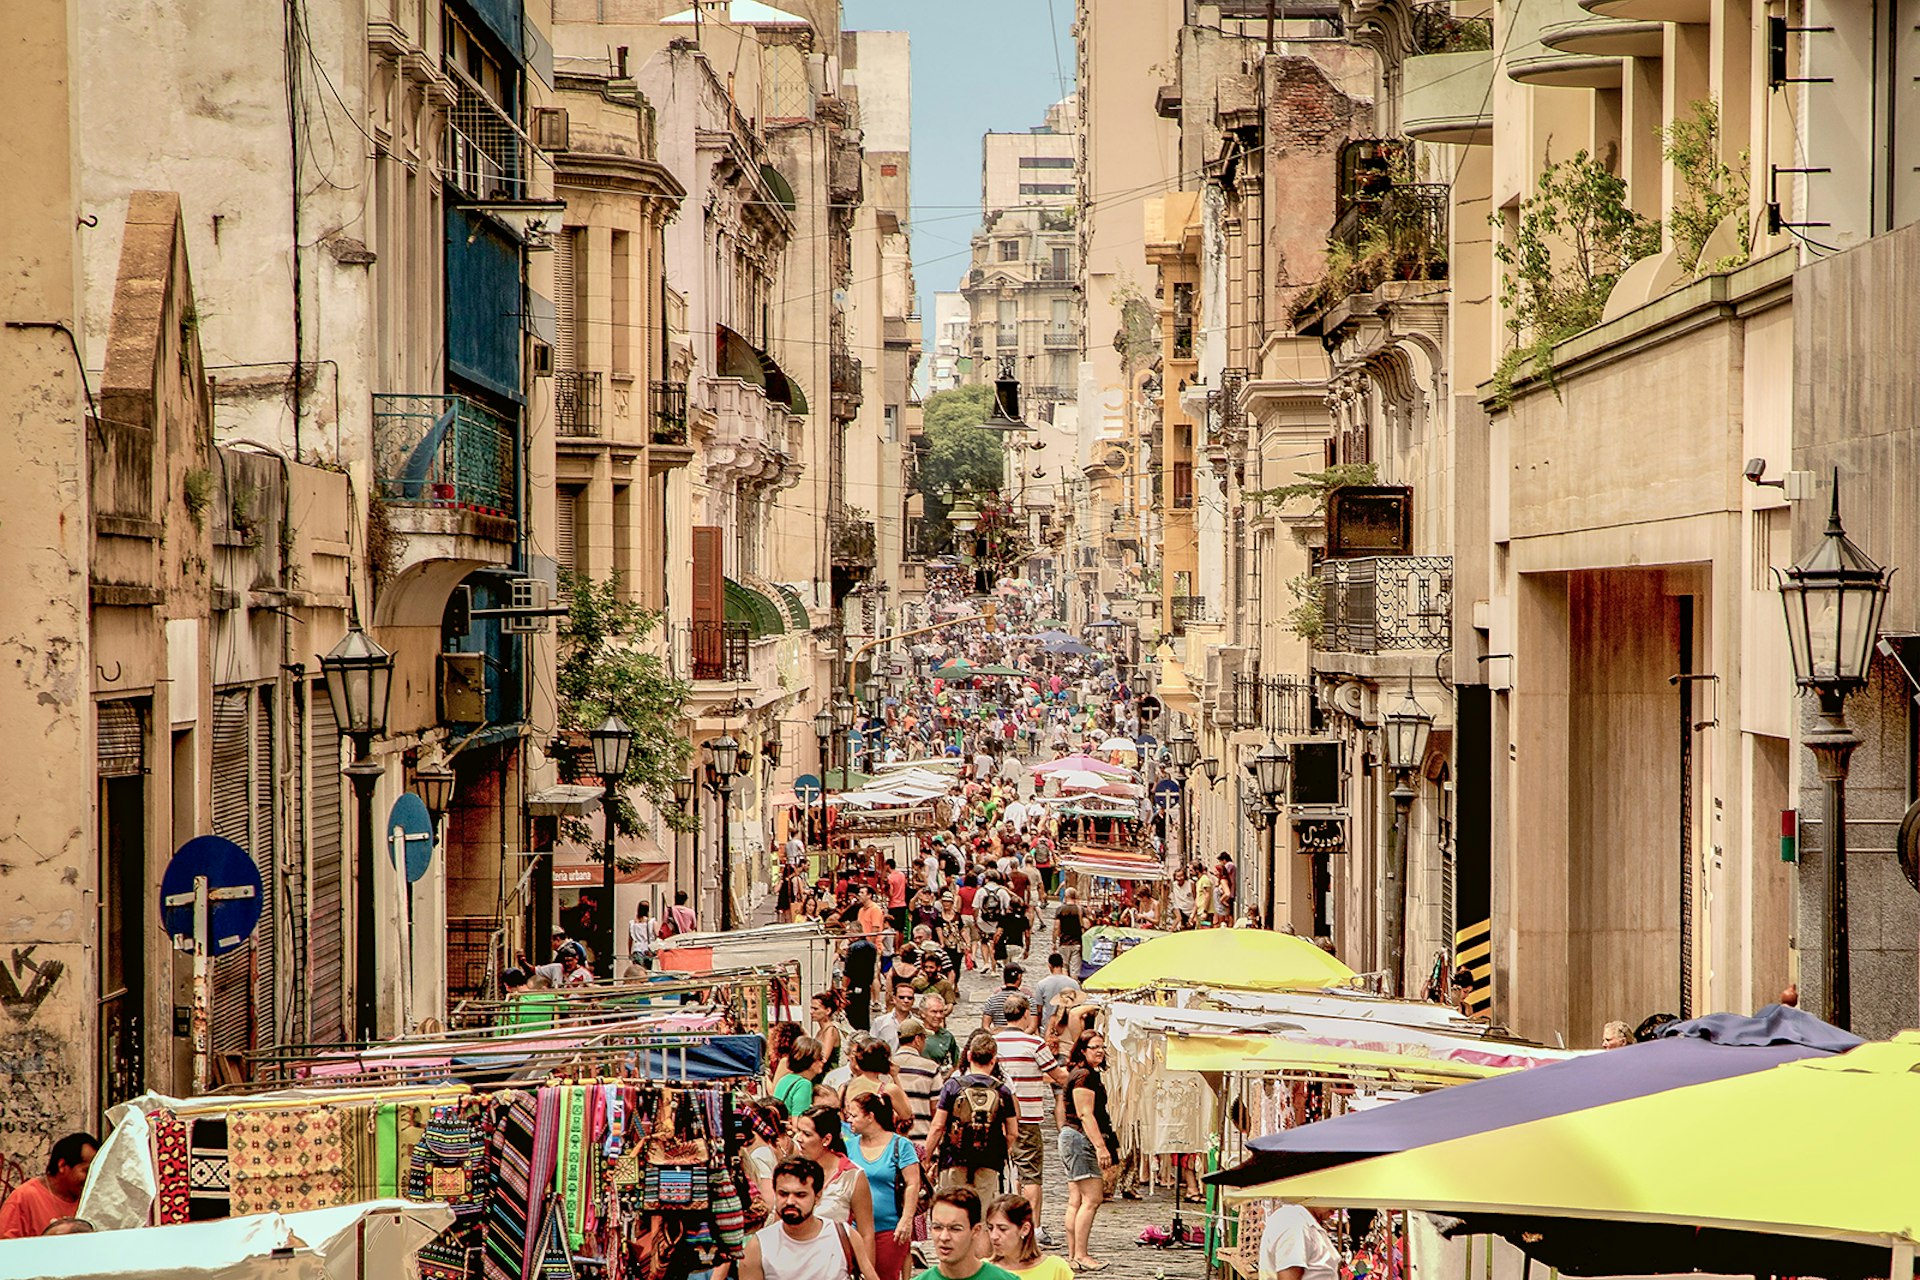 A view down the center of a crowded, stall-lined street in Buenos Aires, Argentina